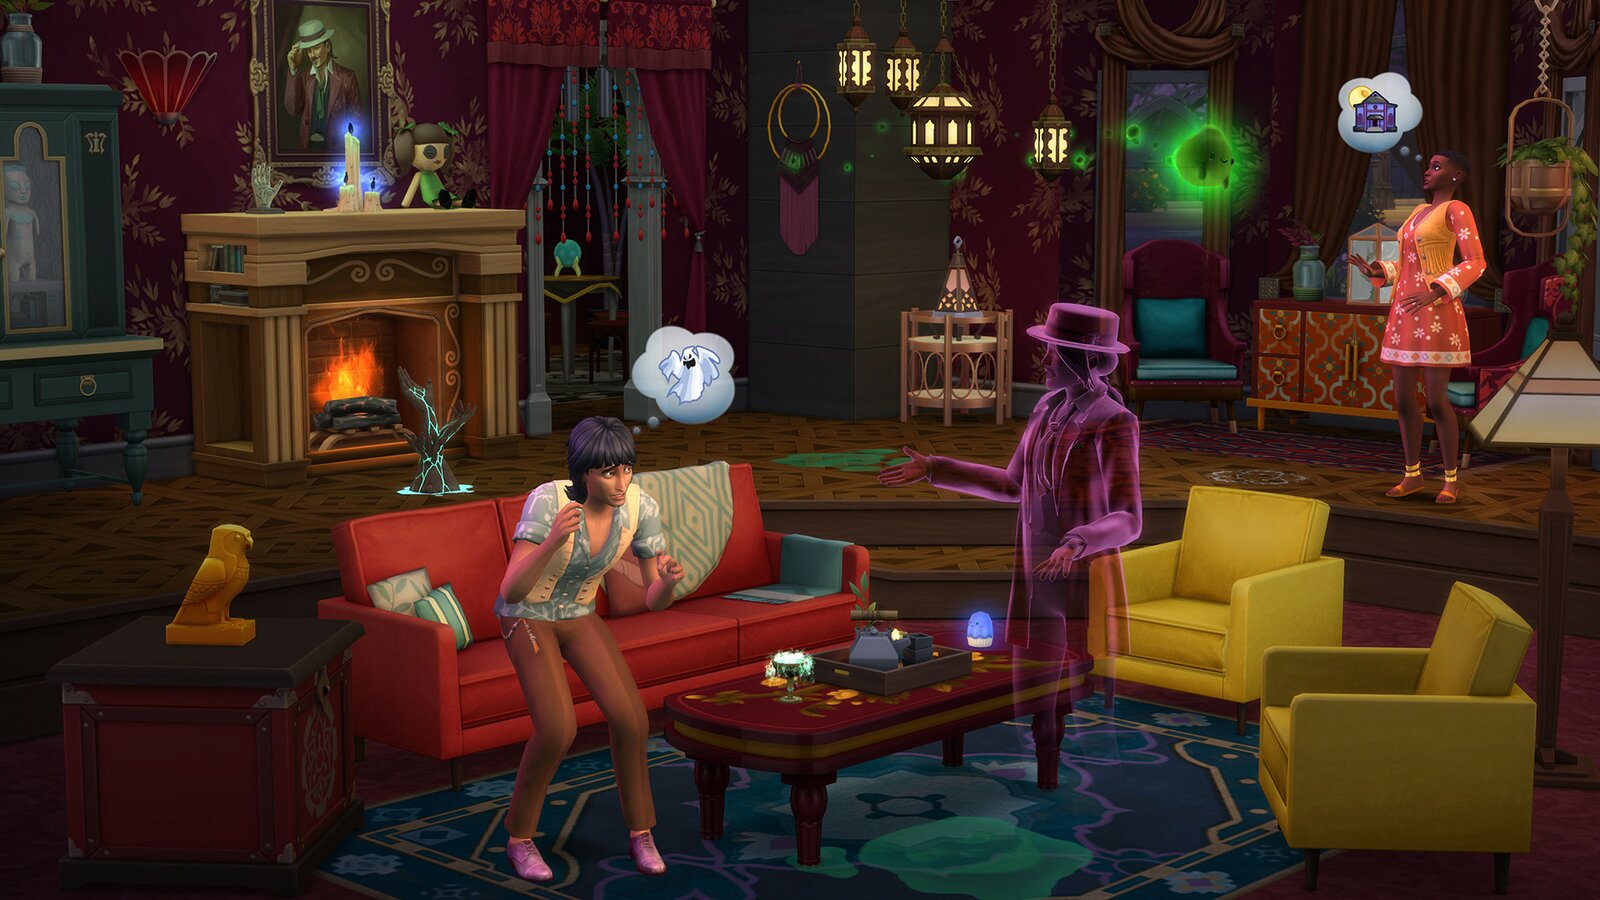 The Sims 4 - Paranormal Stuff Pack